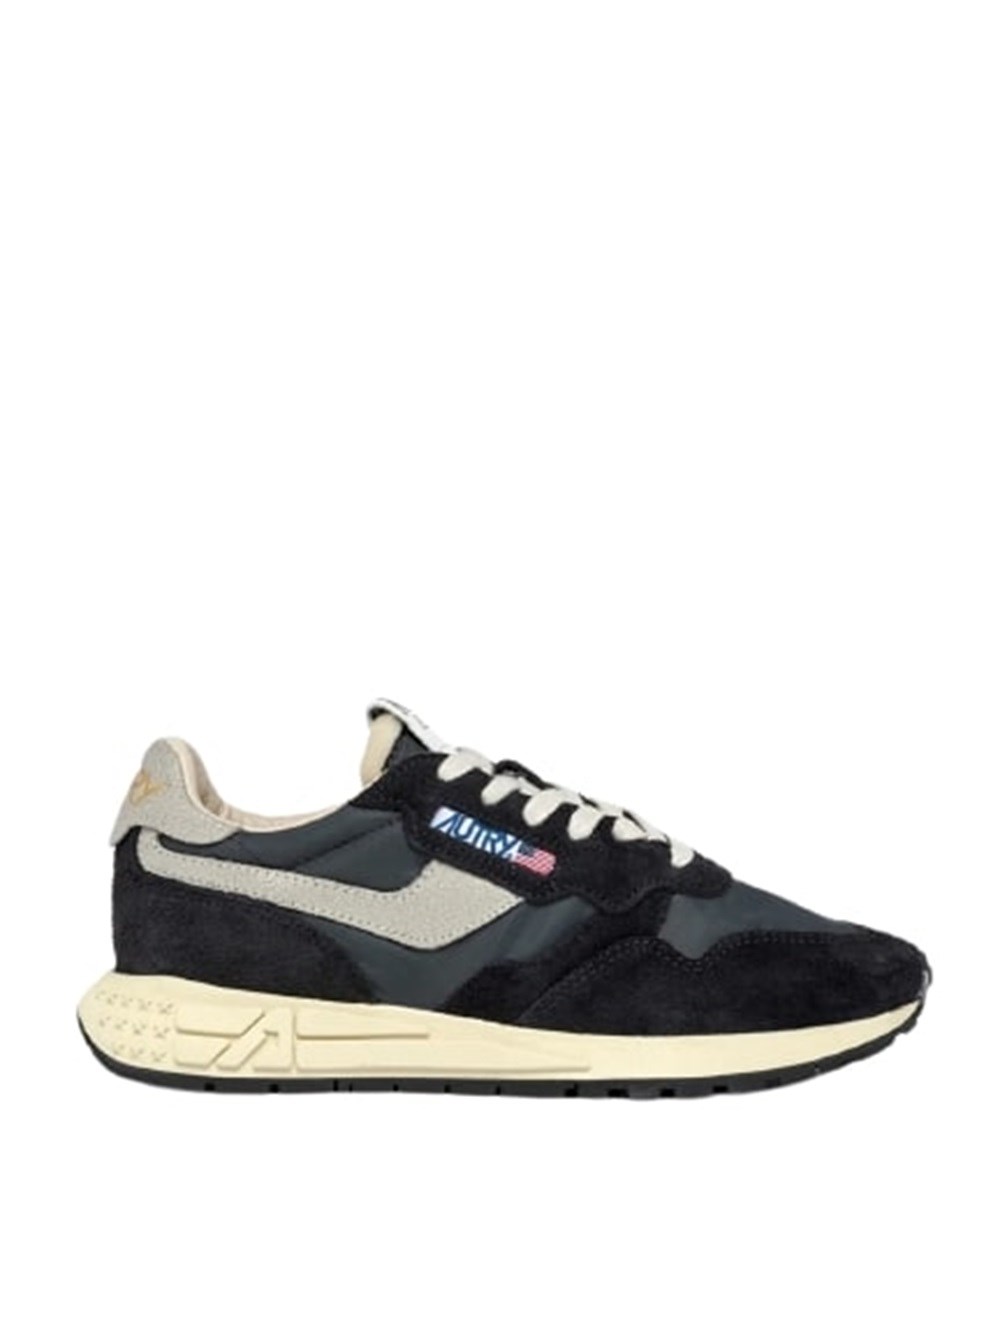 Autry Whirlwind Low Wom Sneakers Color Black In Nc05_nylon_crack_wht_black